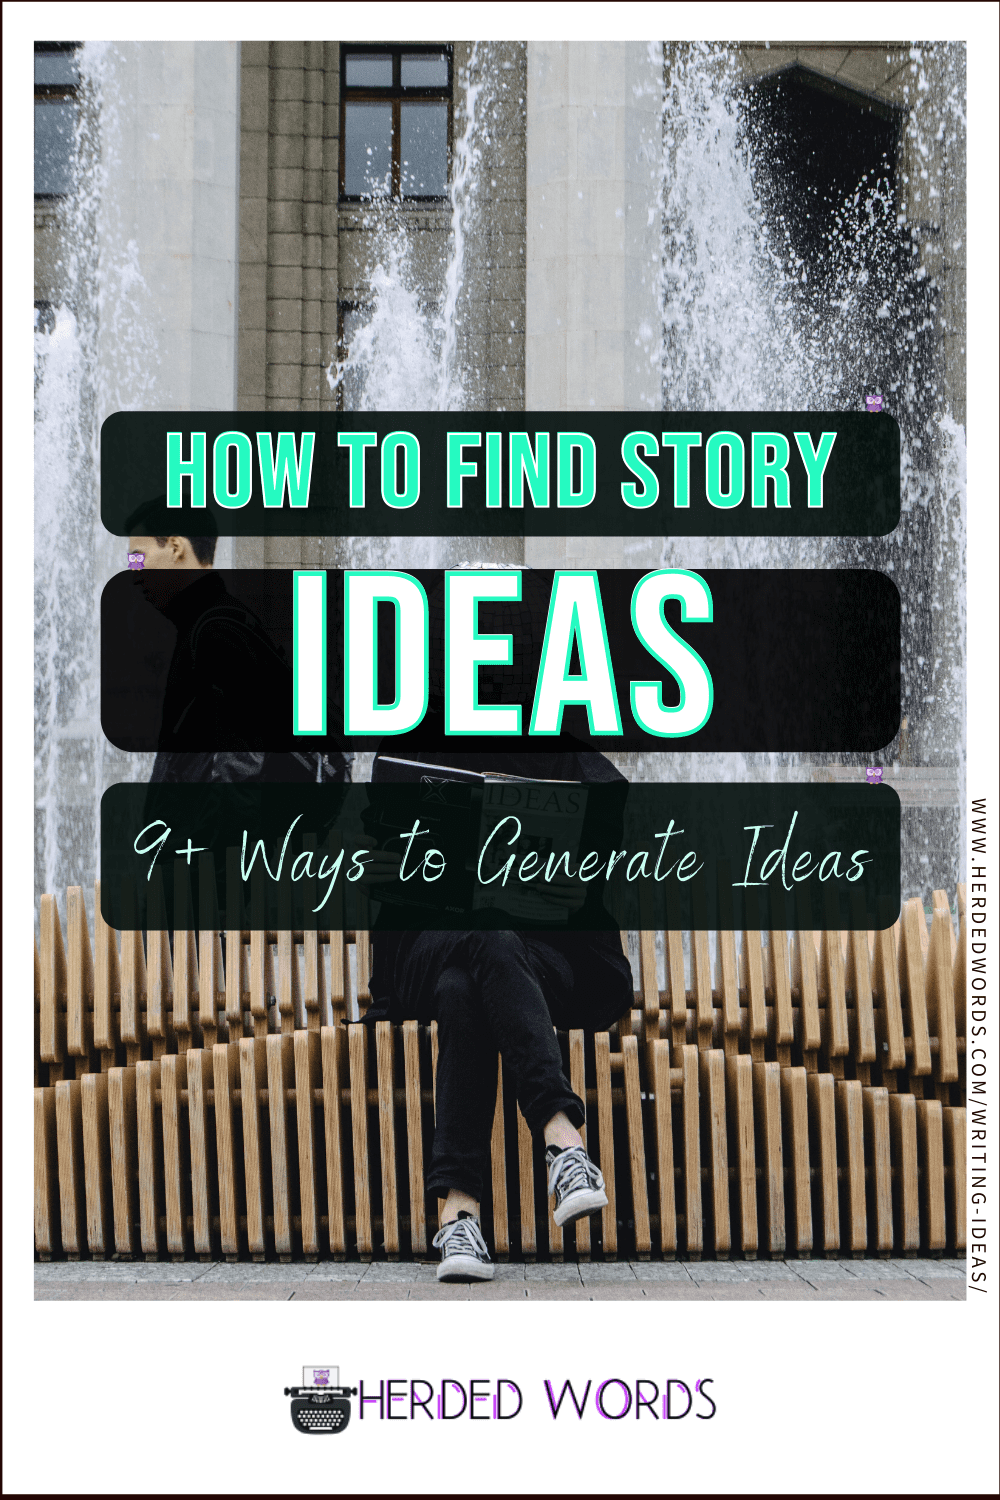 Image Link to How to Find Story Ideas (9+ ways to generate ideas)